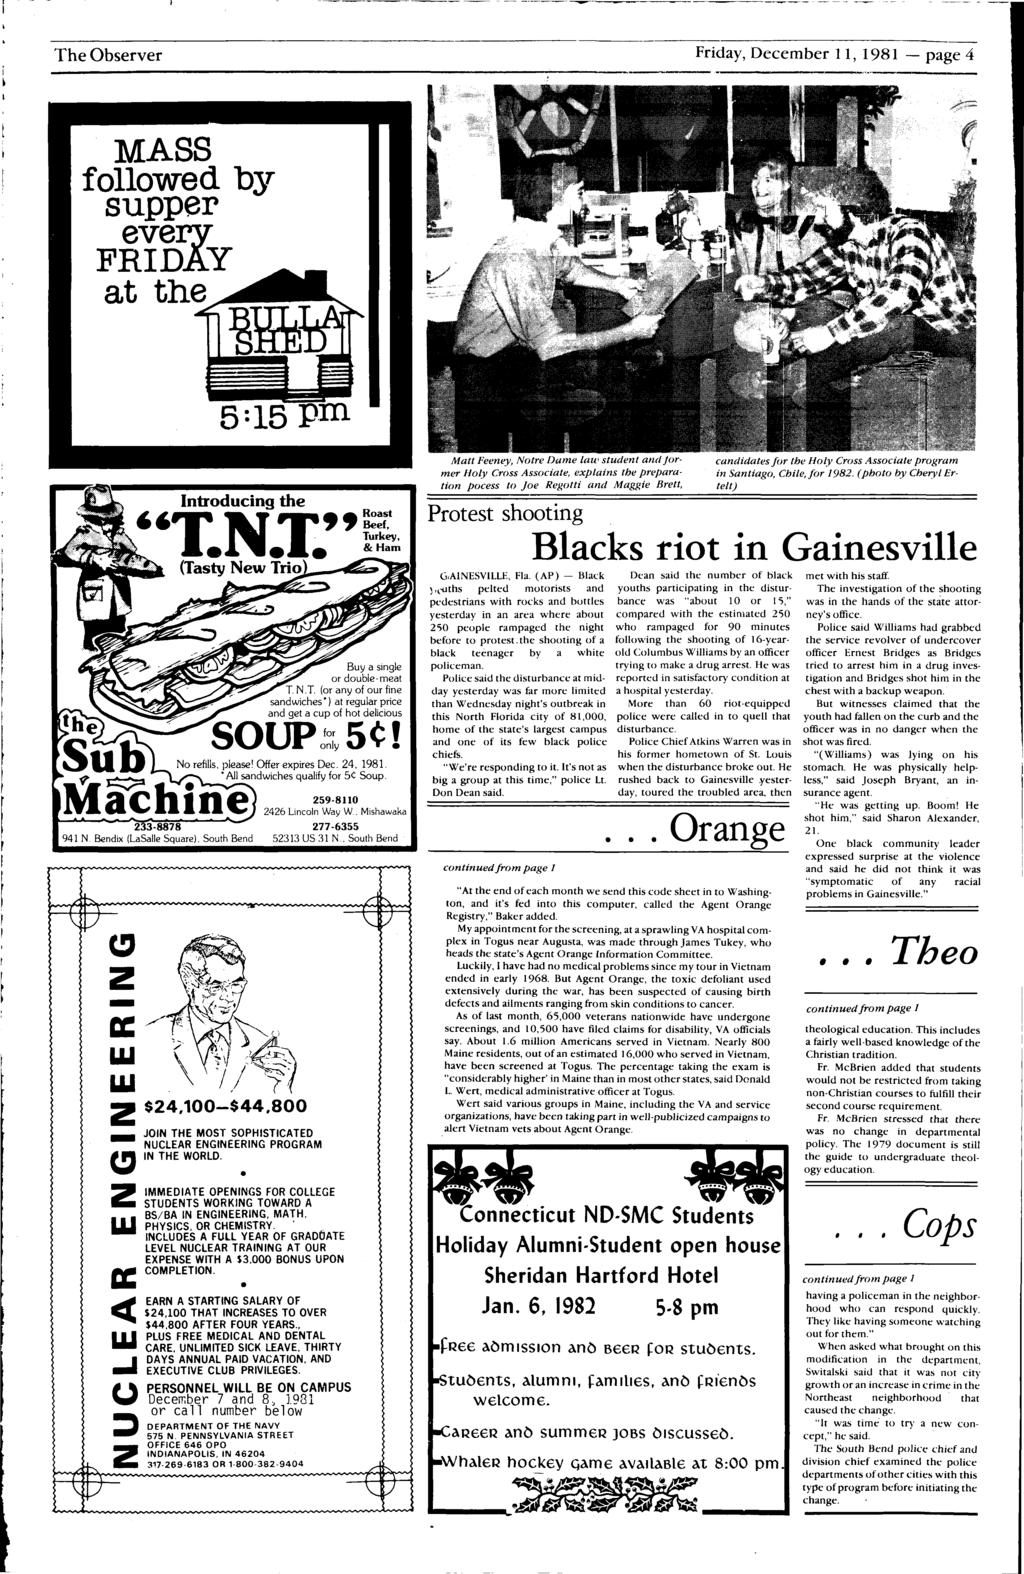 . -- -----------~-~---~-~ The Observer Friday, December 11, 1981 - page 4 MASS follow-ed b:}r supper every_ FRDAY a he 941 N. Bendix c.